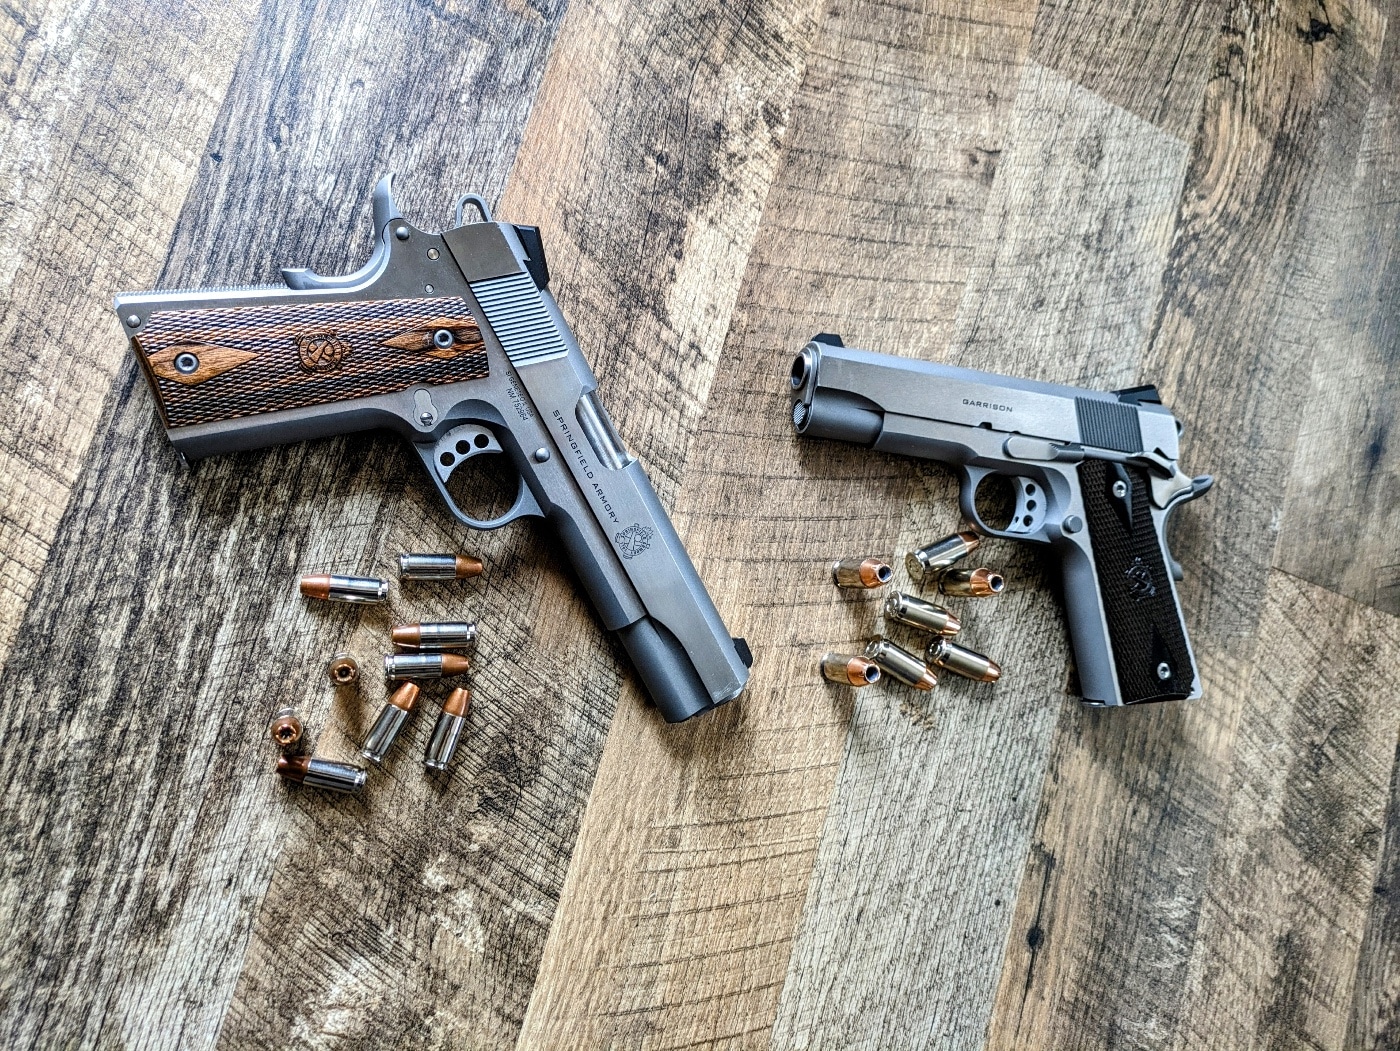 In this photograph, we see both of the Springfield Armory Garrison 1911 pistols — one in 9x19mm Parabellum and the other in .45 ACP.